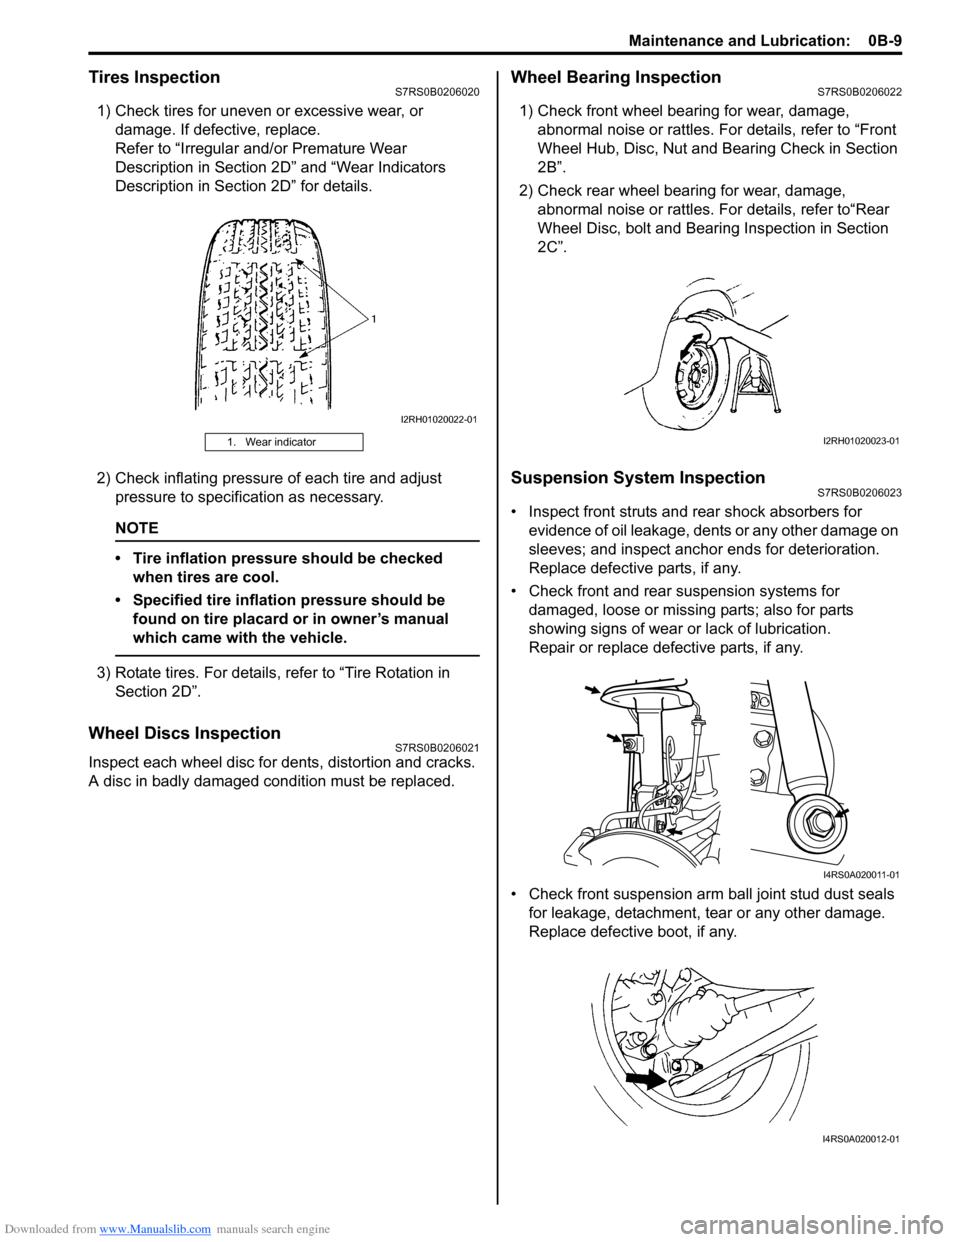 SUZUKI SWIFT 2005 2.G Service Workshop Manual Downloaded from www.Manualslib.com manuals search engine Maintenance and Lubrication:  0B-9
Tires InspectionS7RS0B0206020
1) Check tires for uneven or excessive wear, or damage. If defective, replace.